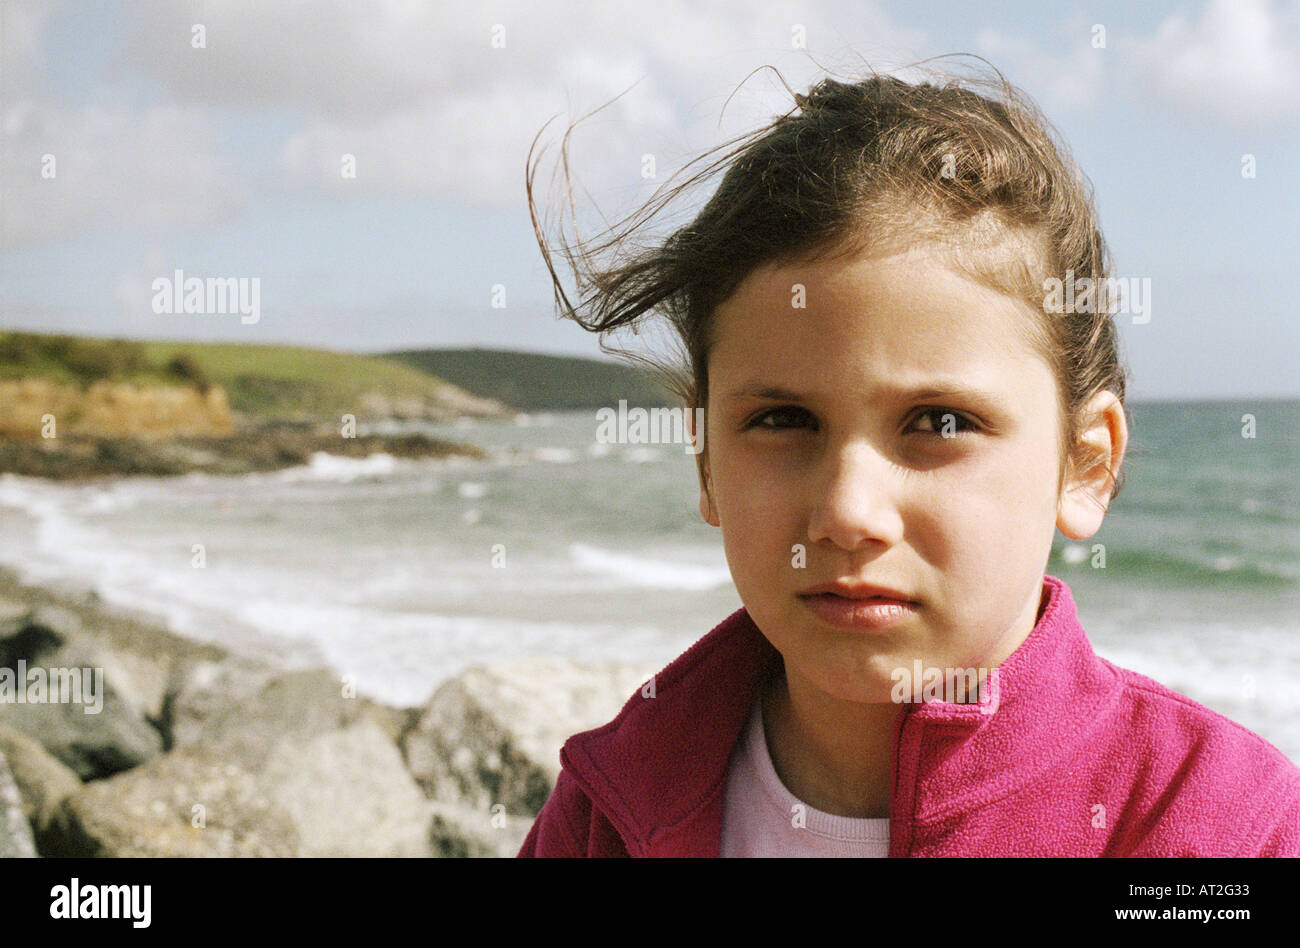 A portrait of a girl standing in front of the sea Stock Photo